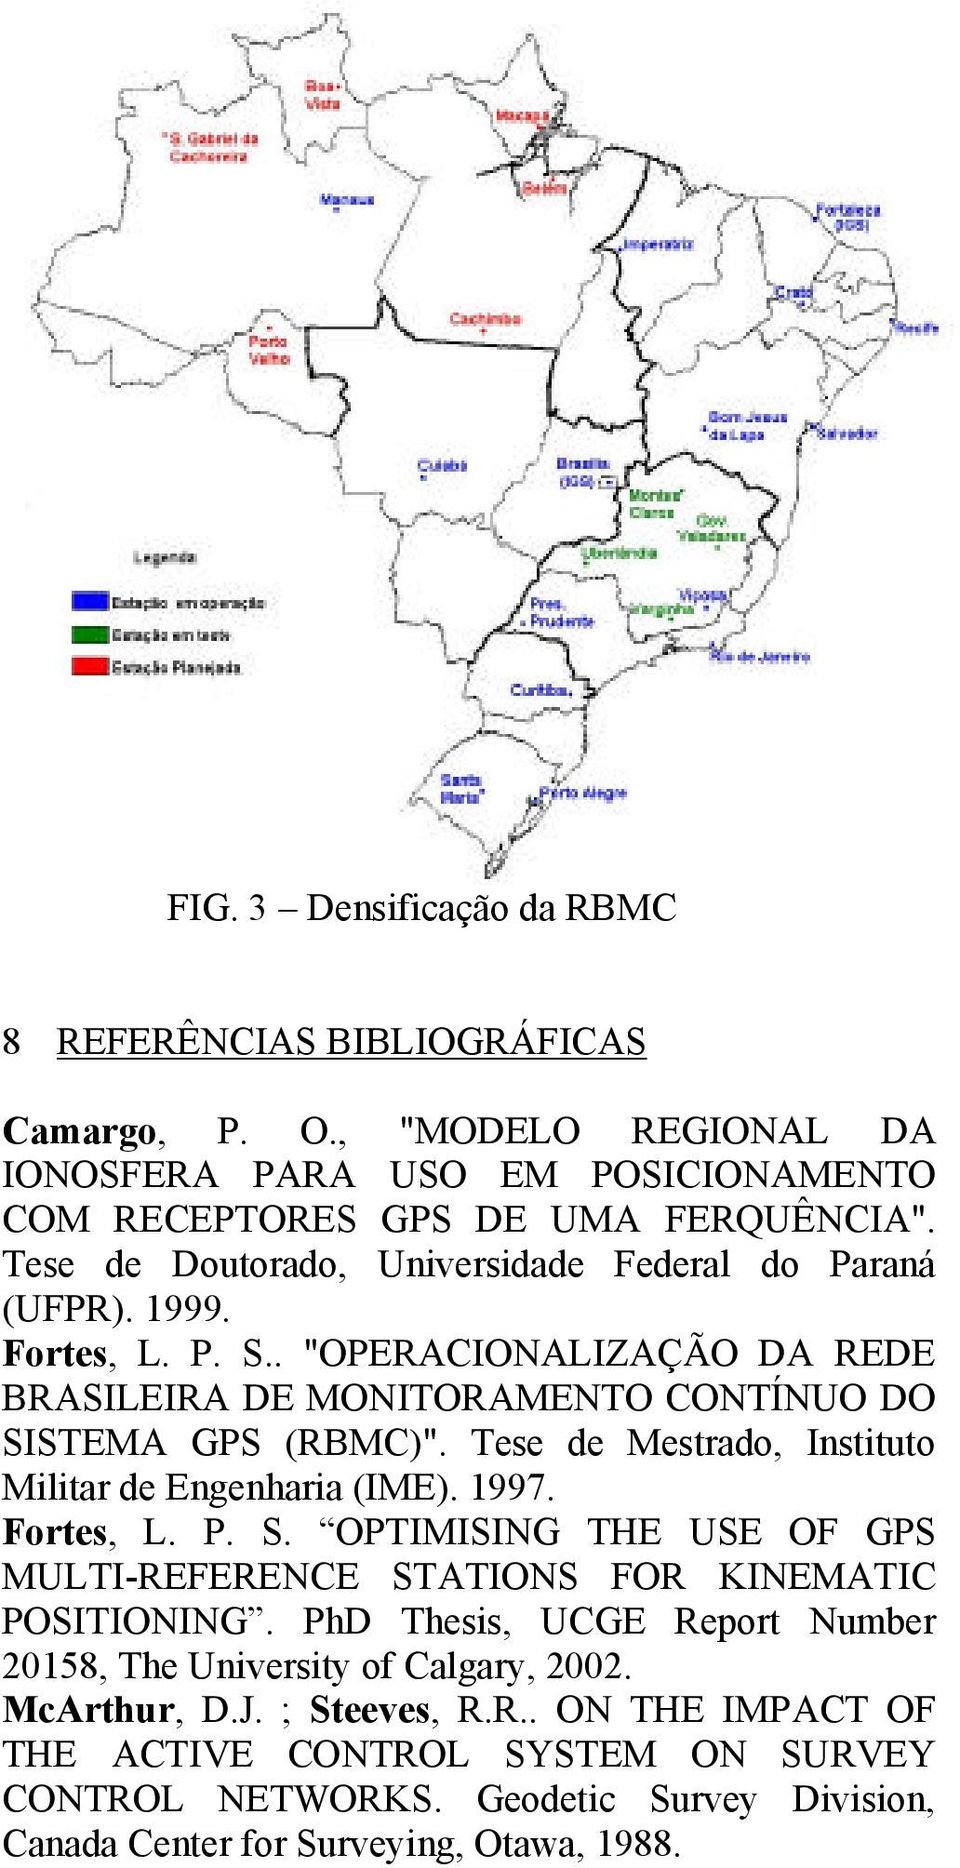 Tese de Mestrado, Instituto Militar de Engenharia (IME). 1997. Fortes, L. P. S. OPTIMISING THE USE OF GPS MULTI-REFERENCE STATIONS FOR KINEMATIC POSITIONING.